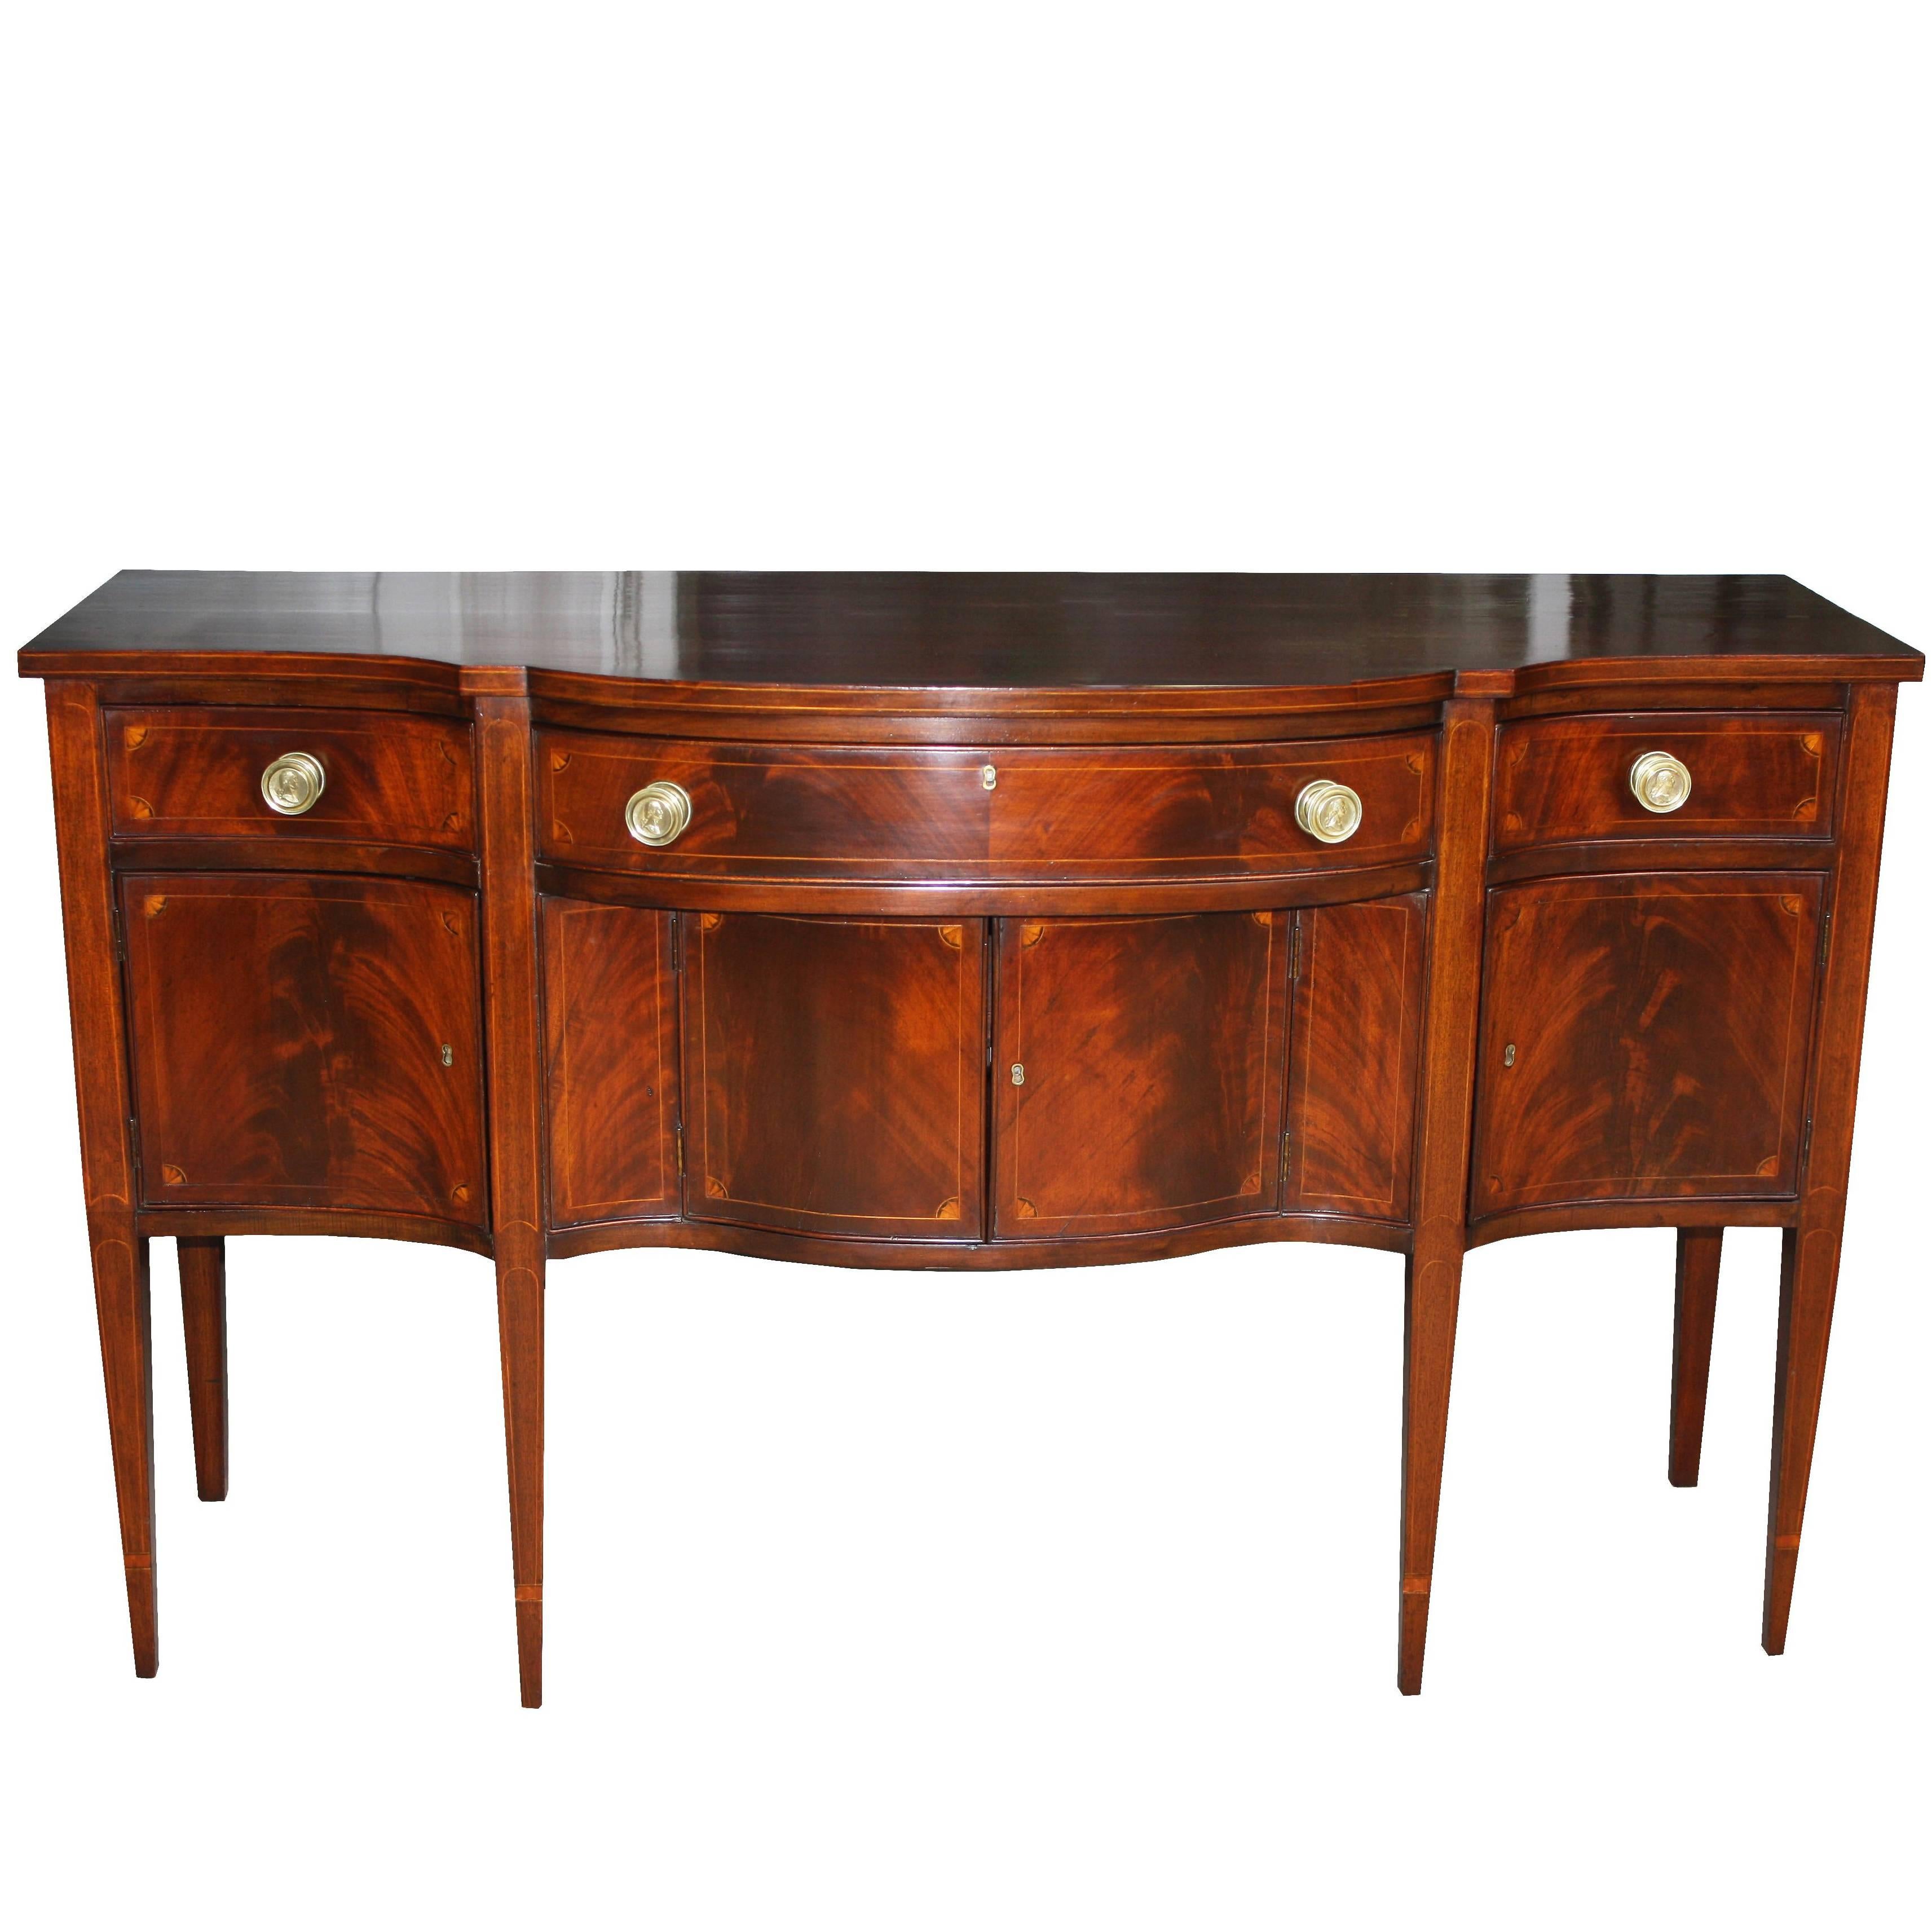 American Federal Sideboard with George Washington Commemorative Brasses